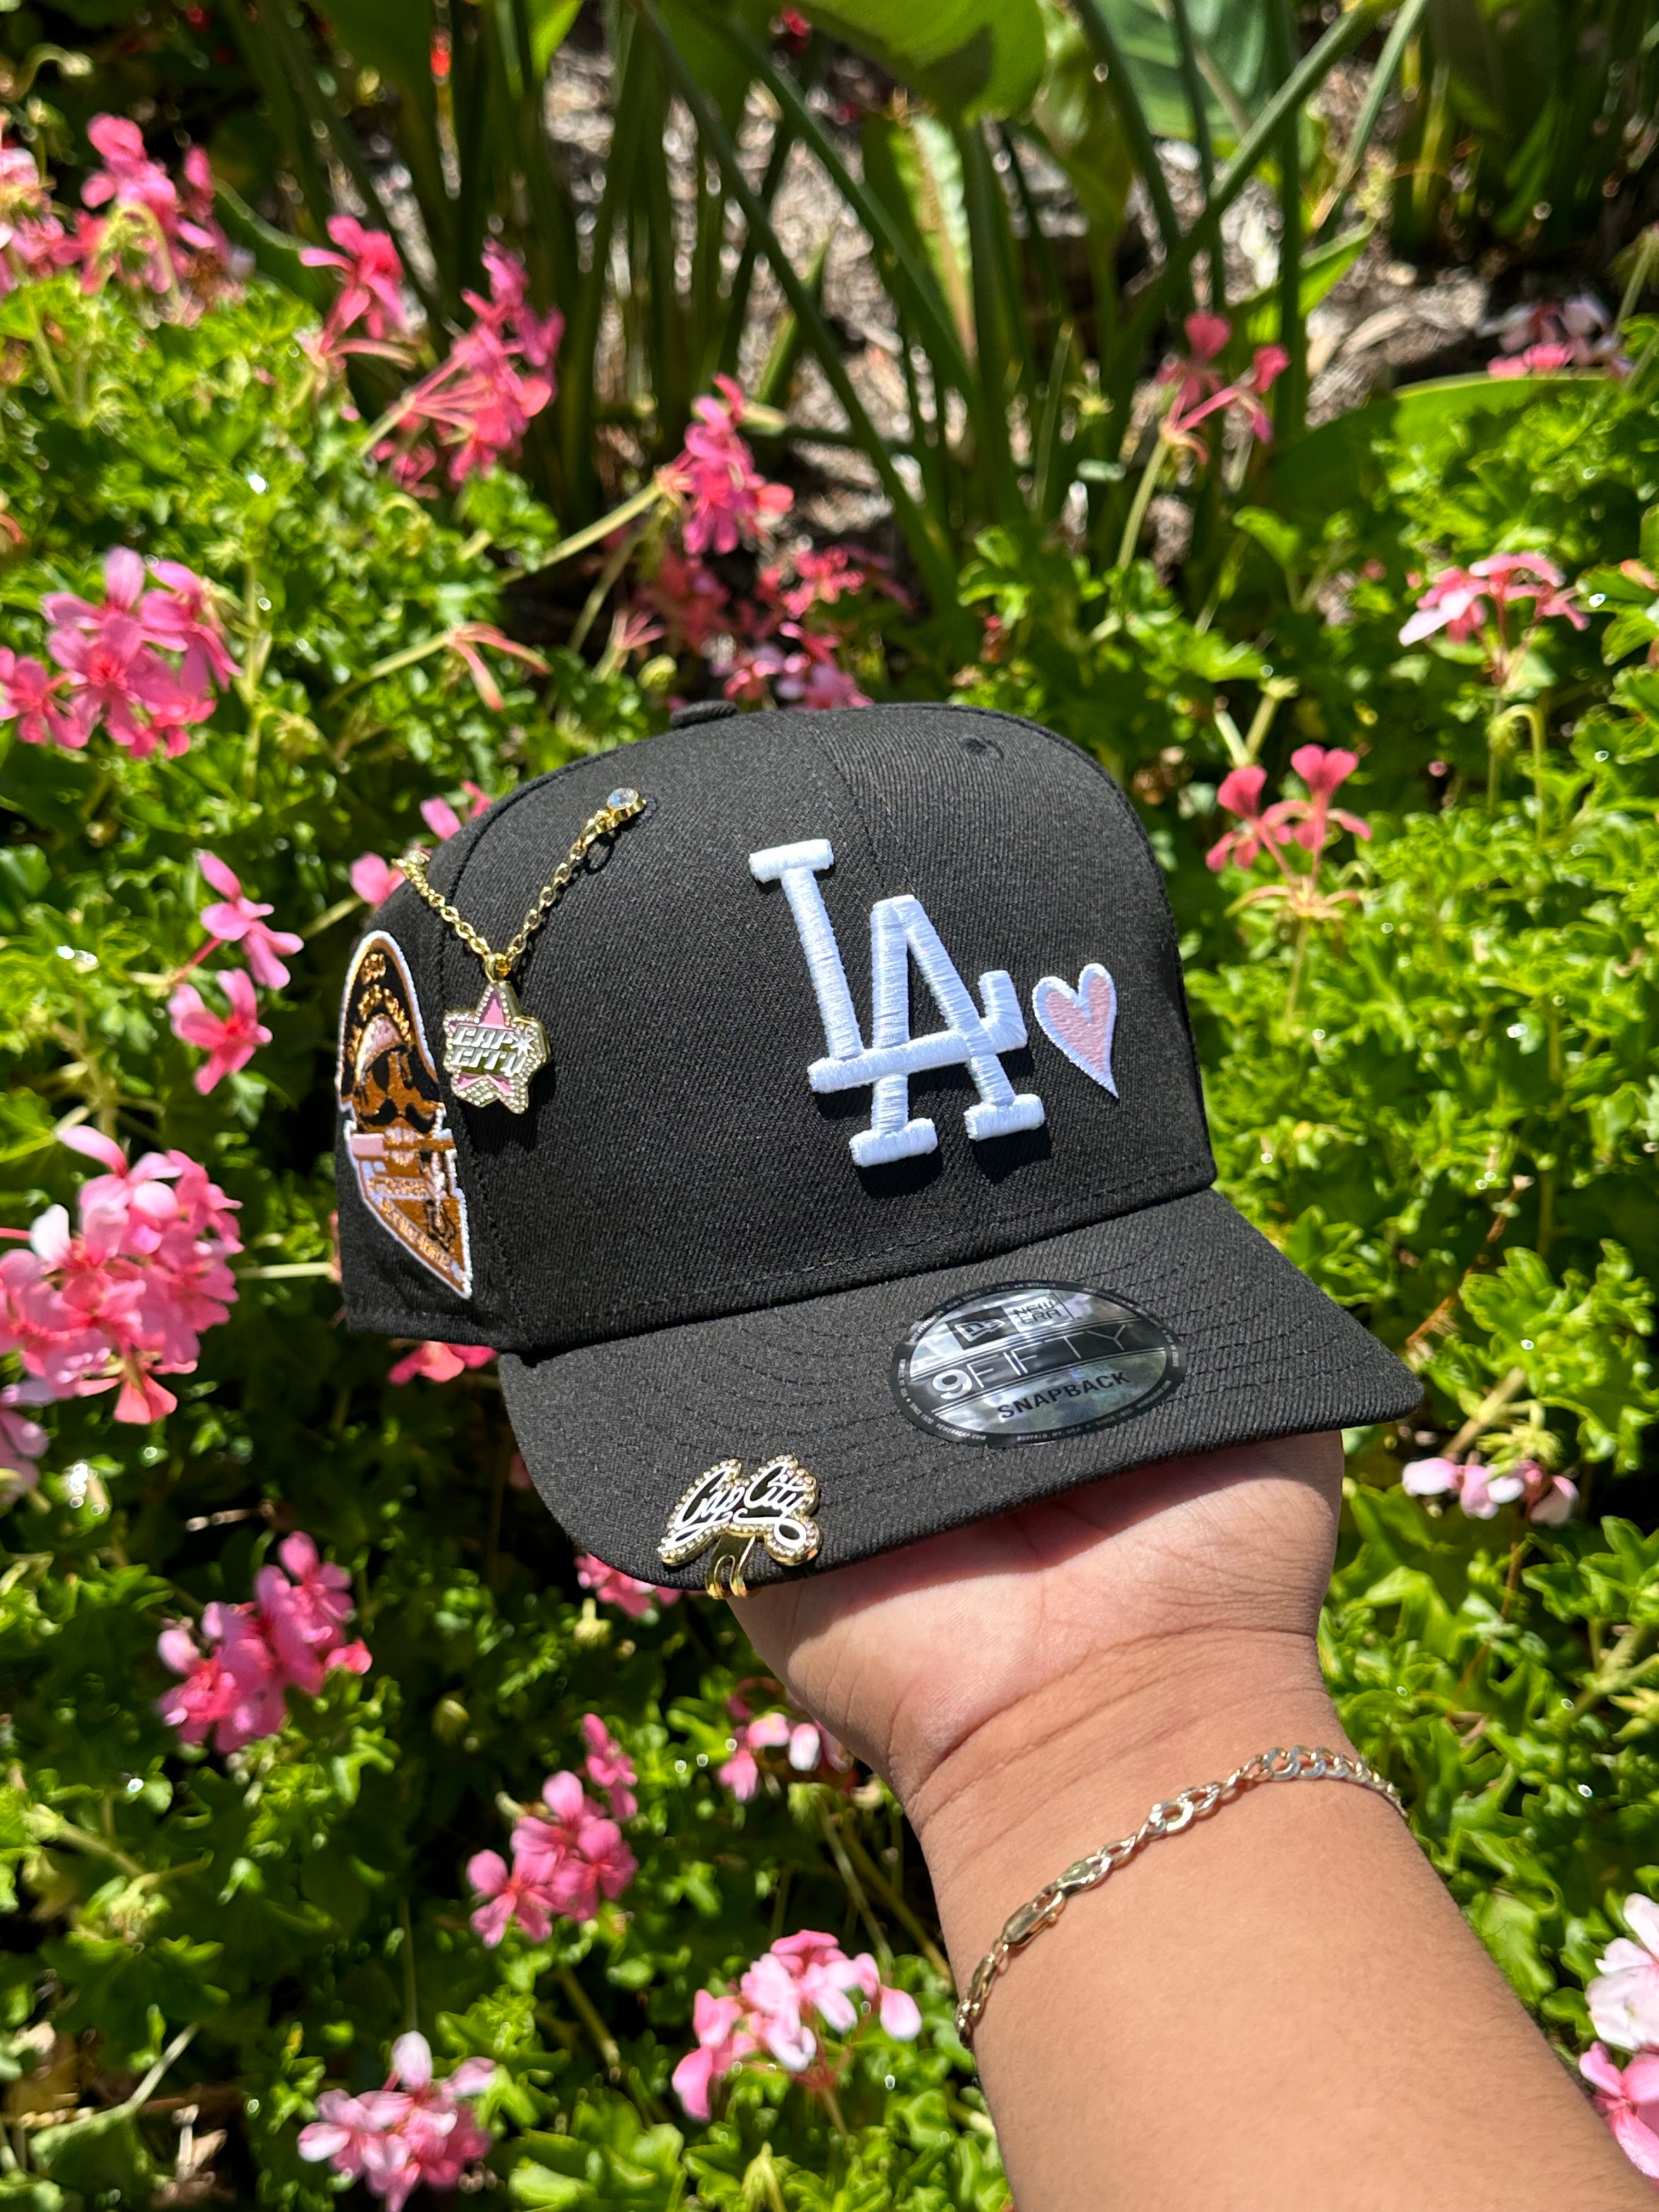 NEW ERA EXCLUSIVE 9FIFTY BLACK LOS ANGELES DODGERS SNAPBACK W/ PINK HEART + 1959 ASG SIDE PATCH